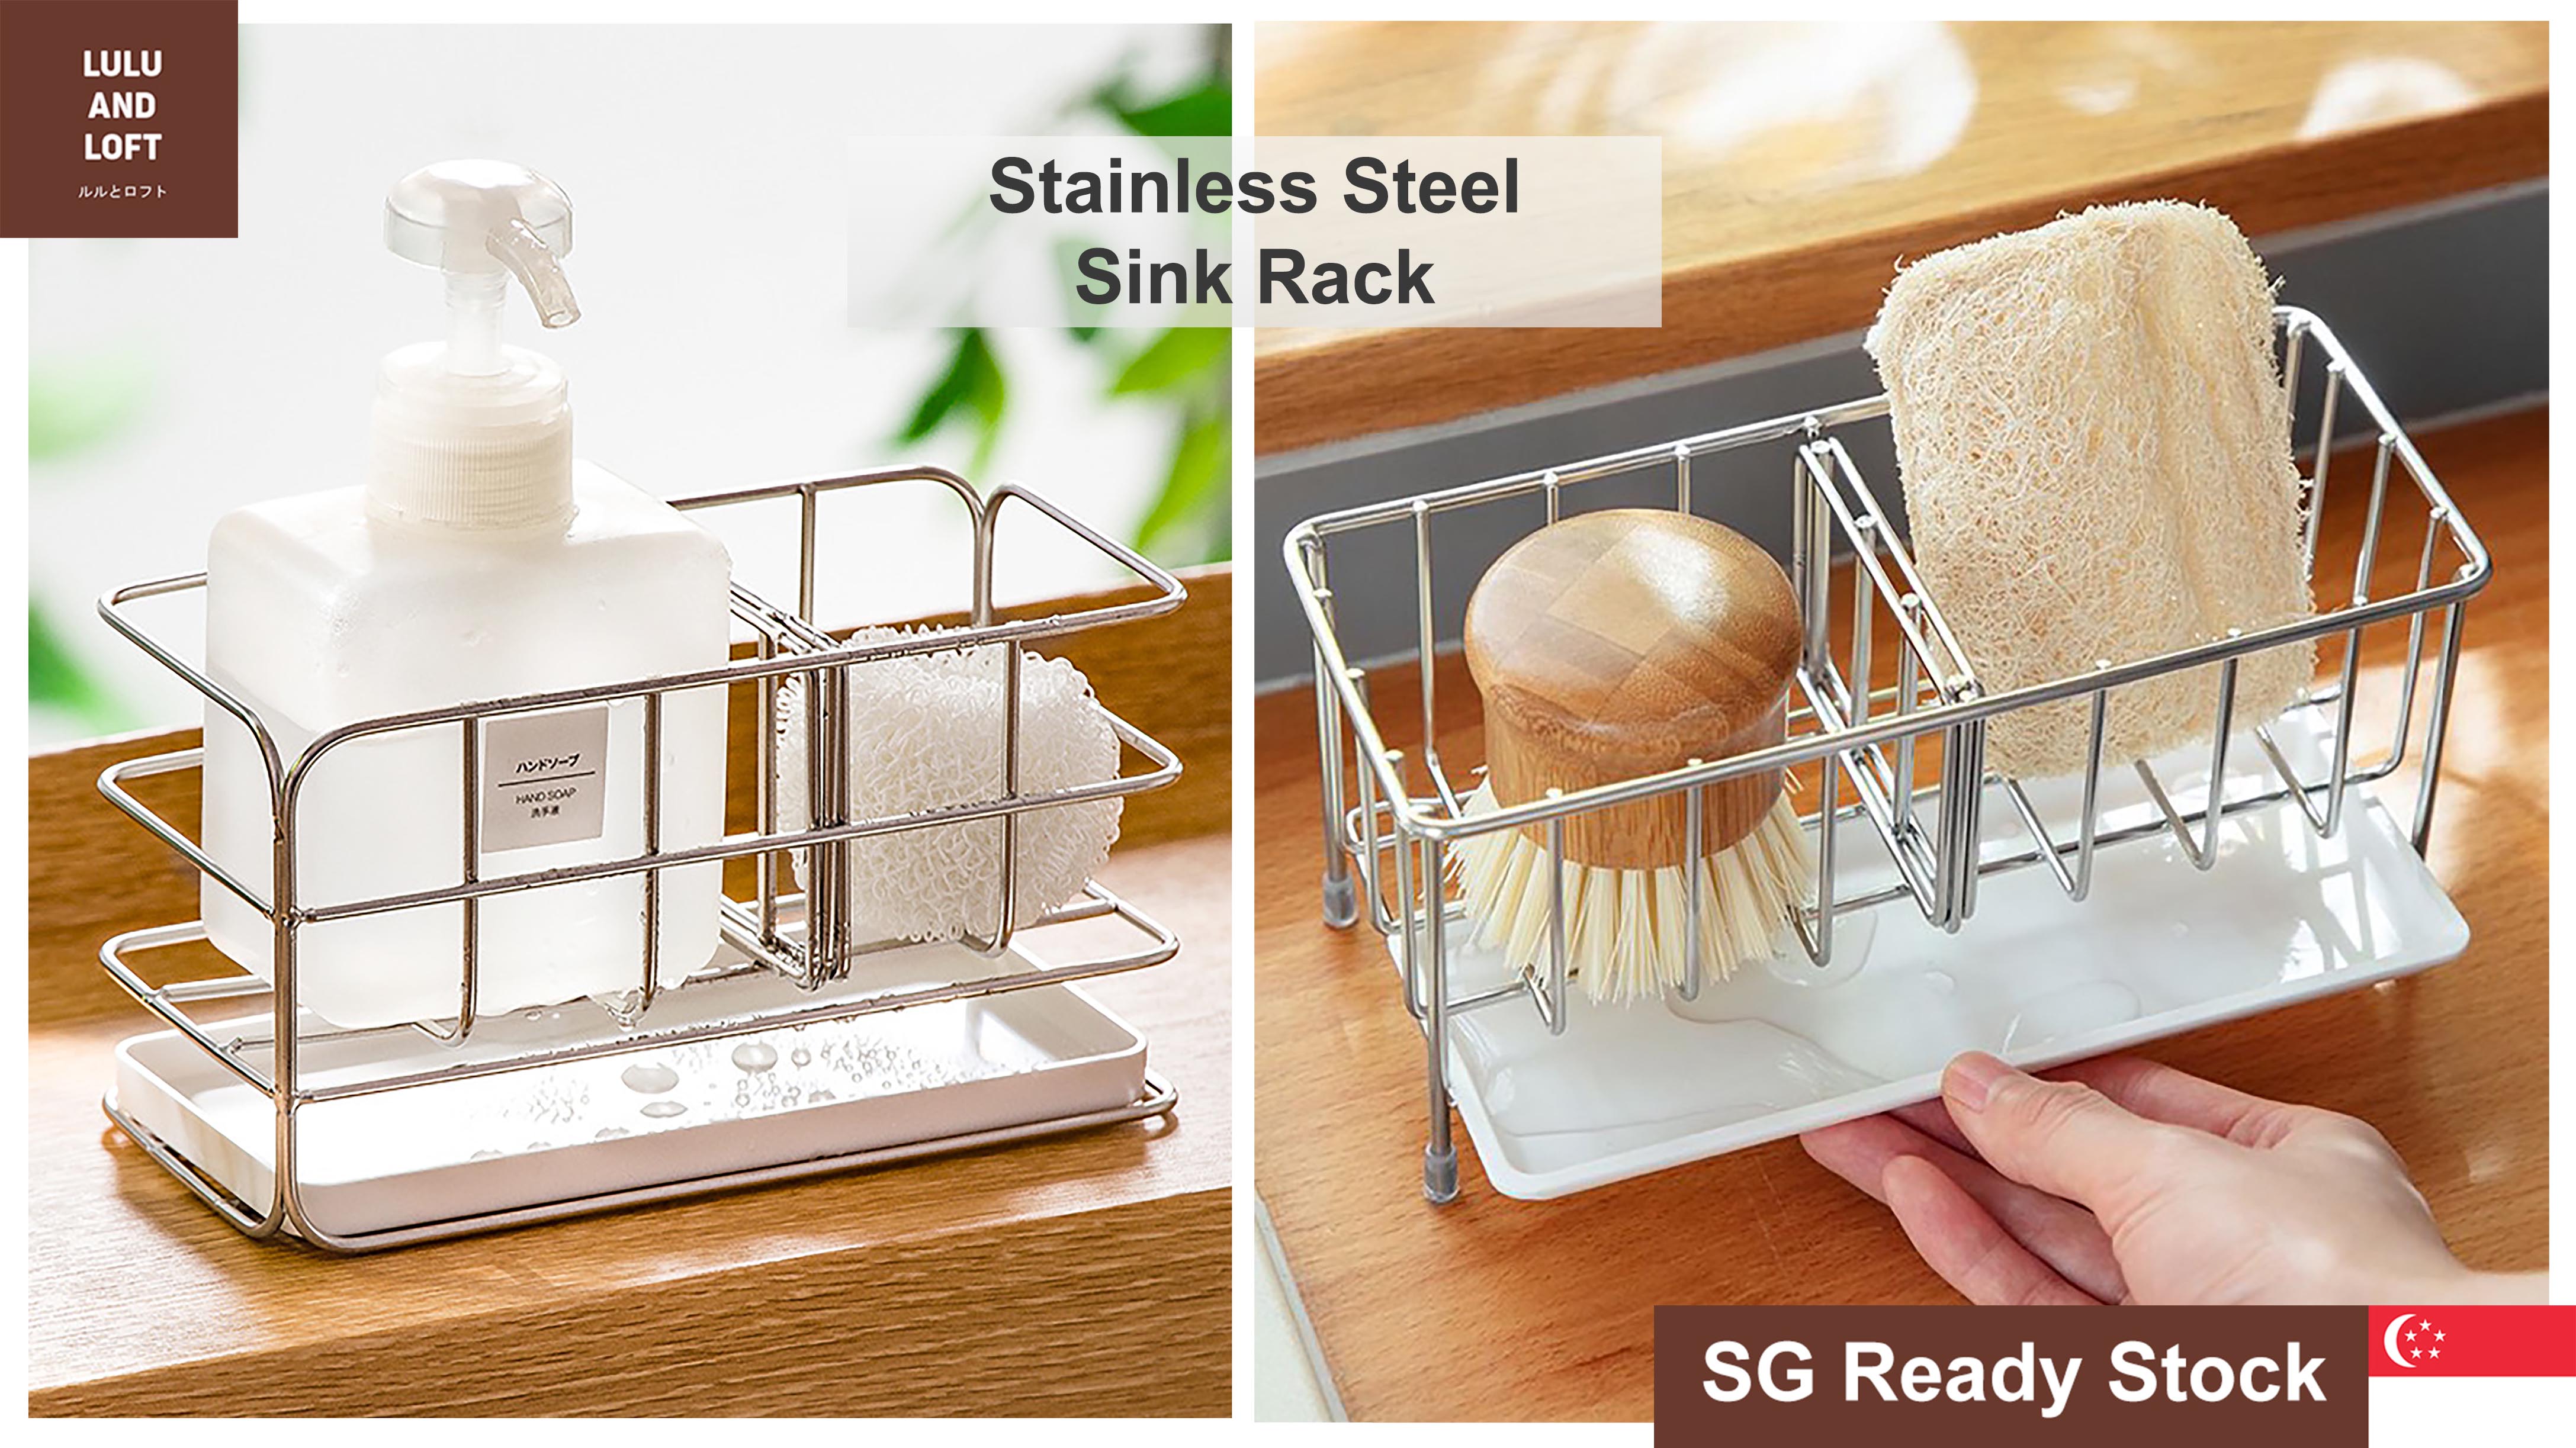 KitchenAid Full-Size Dish Rack: How It Performed in Our Tests - Bob Vila